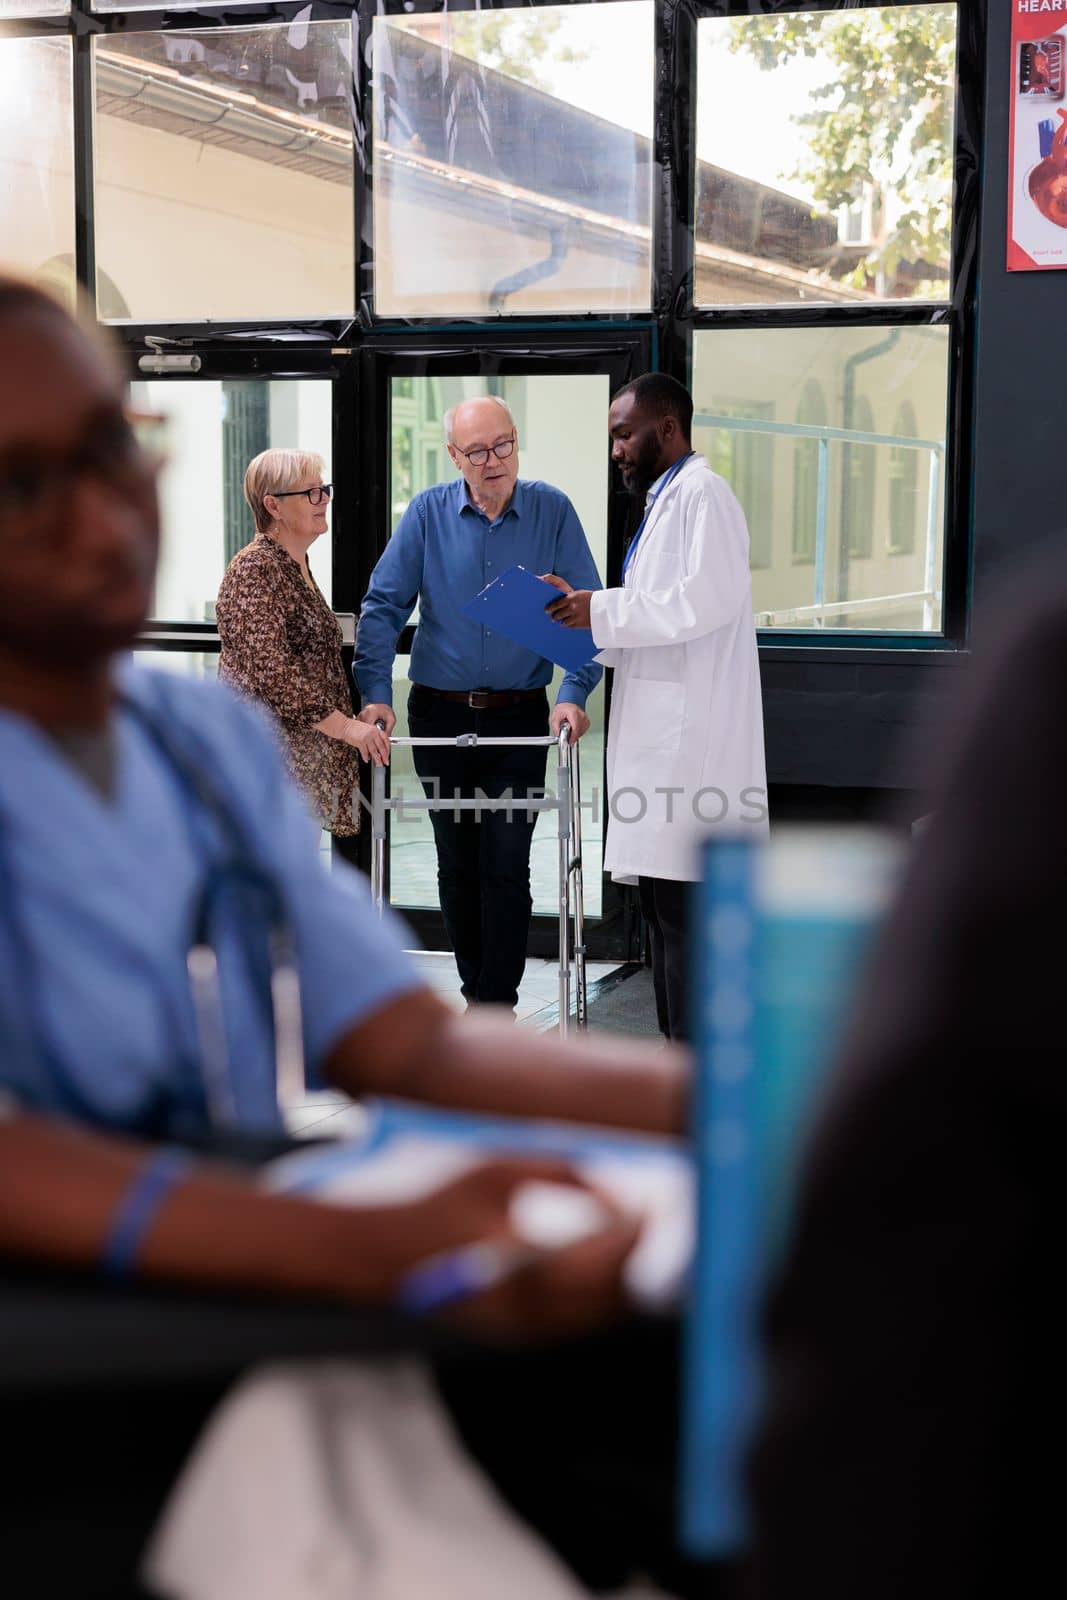 Practitioner doctor discussing illness symptoms with injured elderly patient by DCStudio